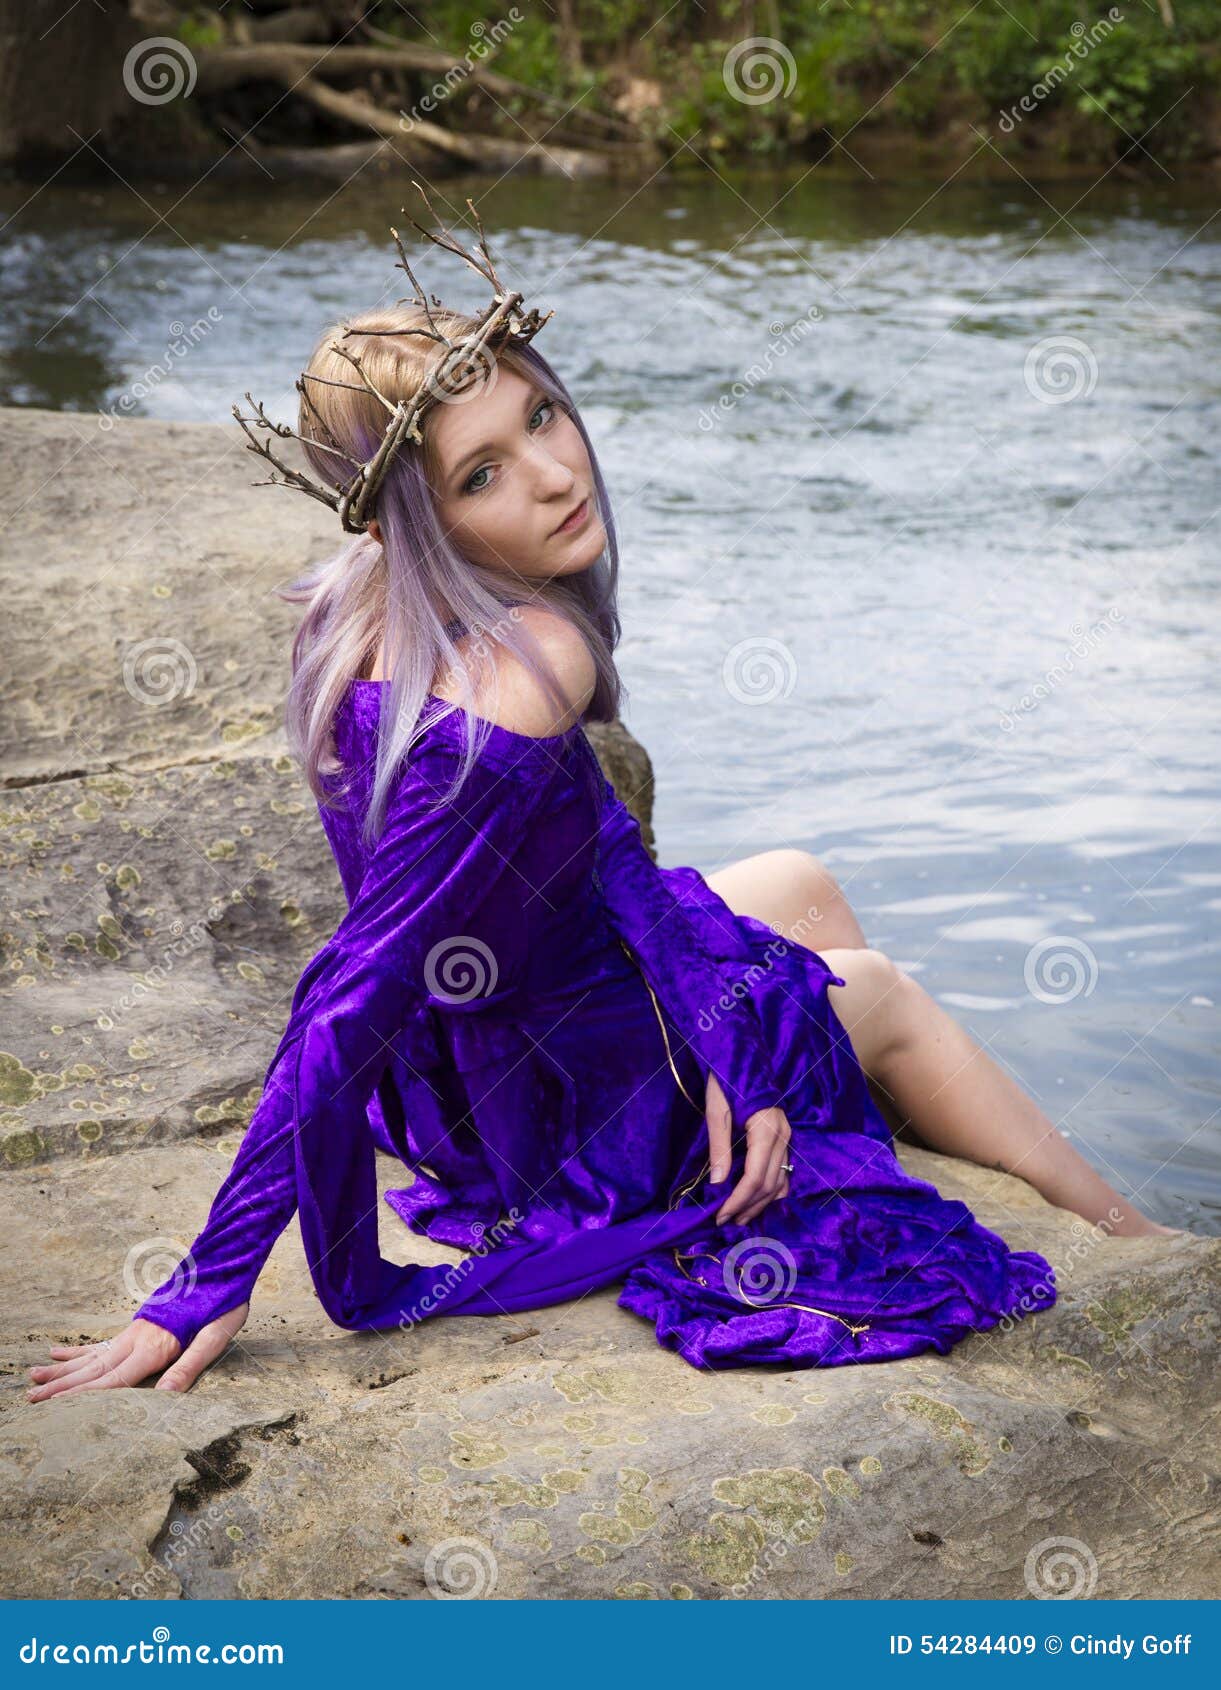 Young woman in purple gown sitting by a river. Beautiful young woman wearing purple velvet gown and twig crown sitting on some rocks by a river.